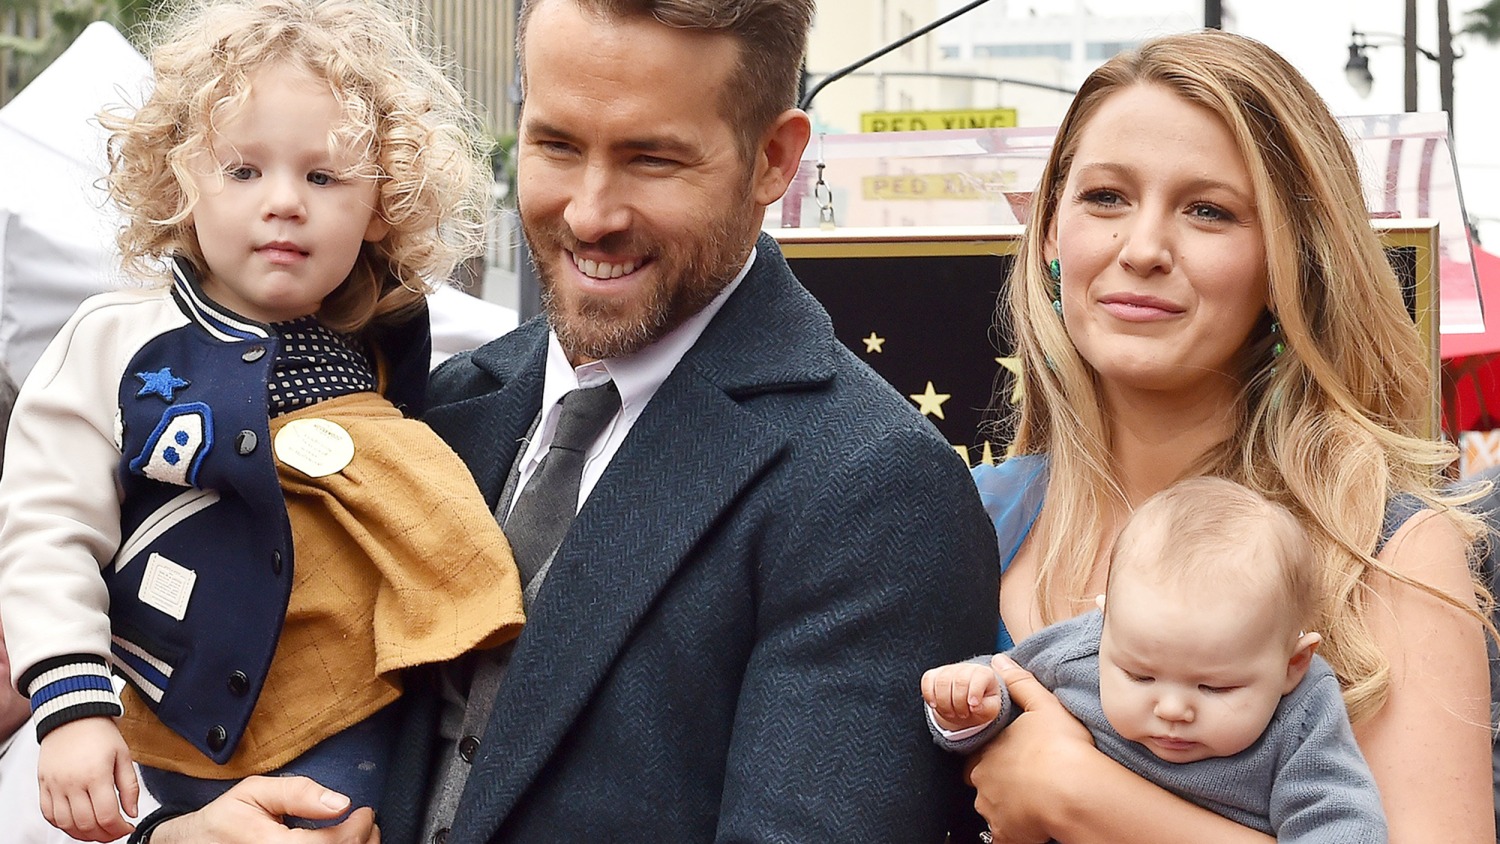 Blake Lively has four kids now and she's tired, which is understandable